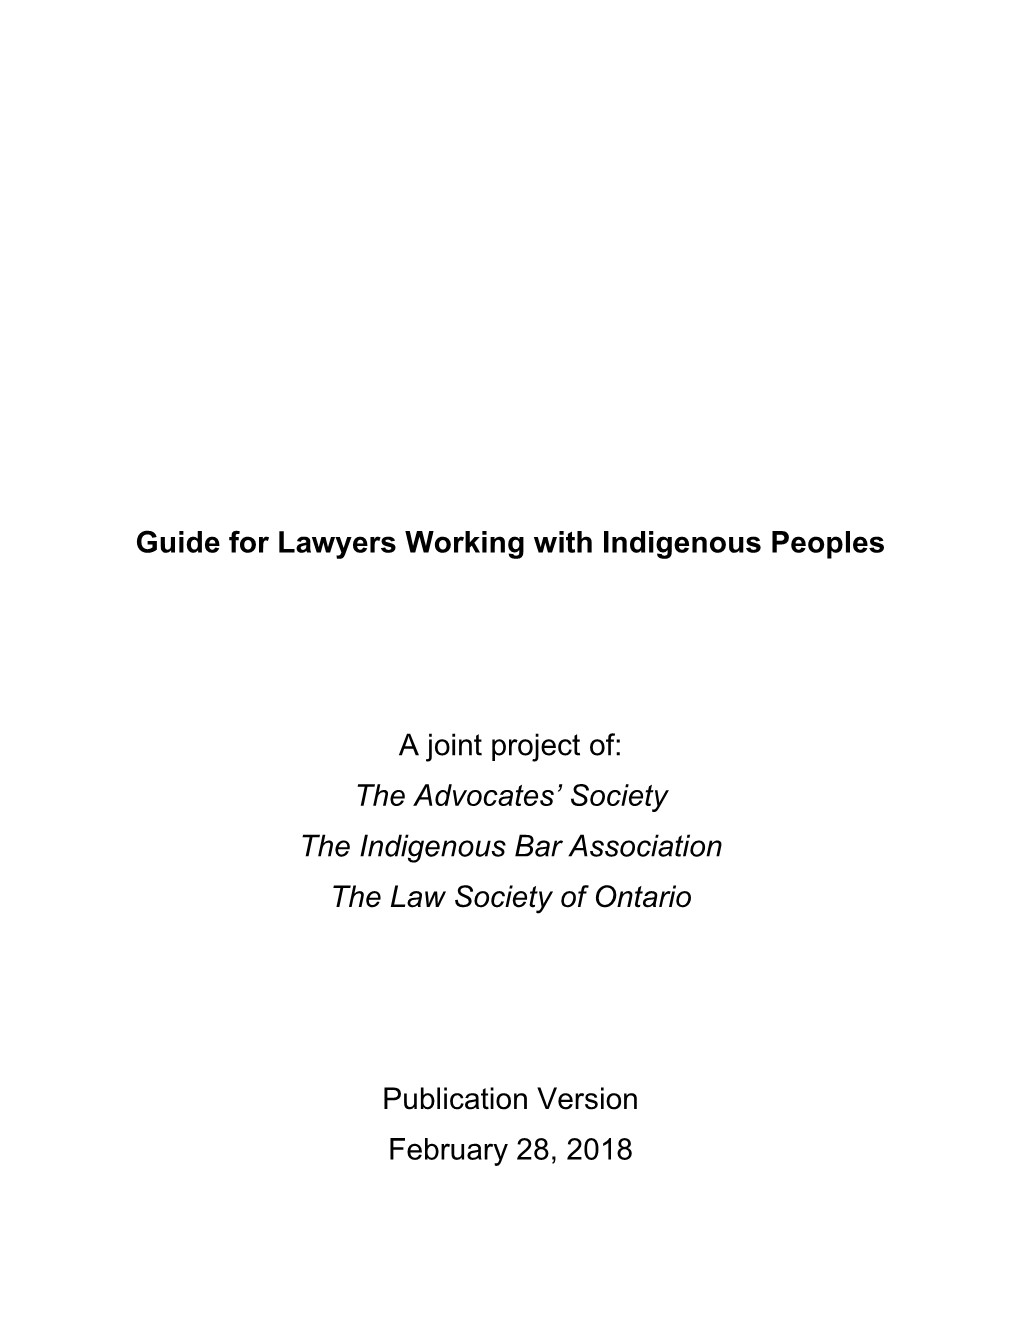 Guide for Lawyers Working with Indigenous Peoples a Joint Project